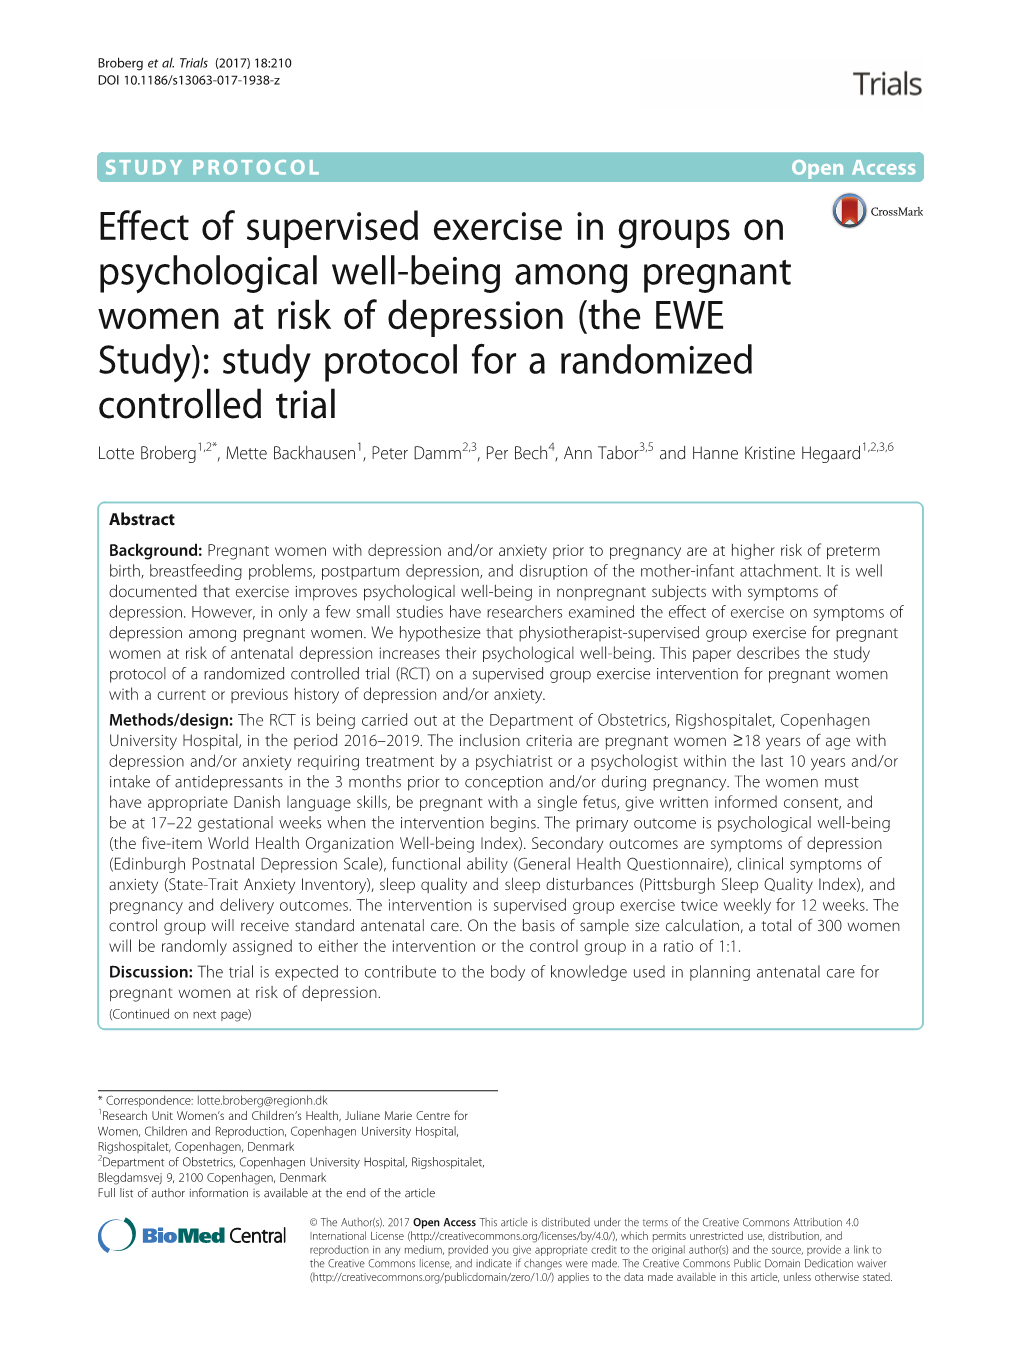 Effect of Supervised Exercise in Groups on Psychological Well-Being